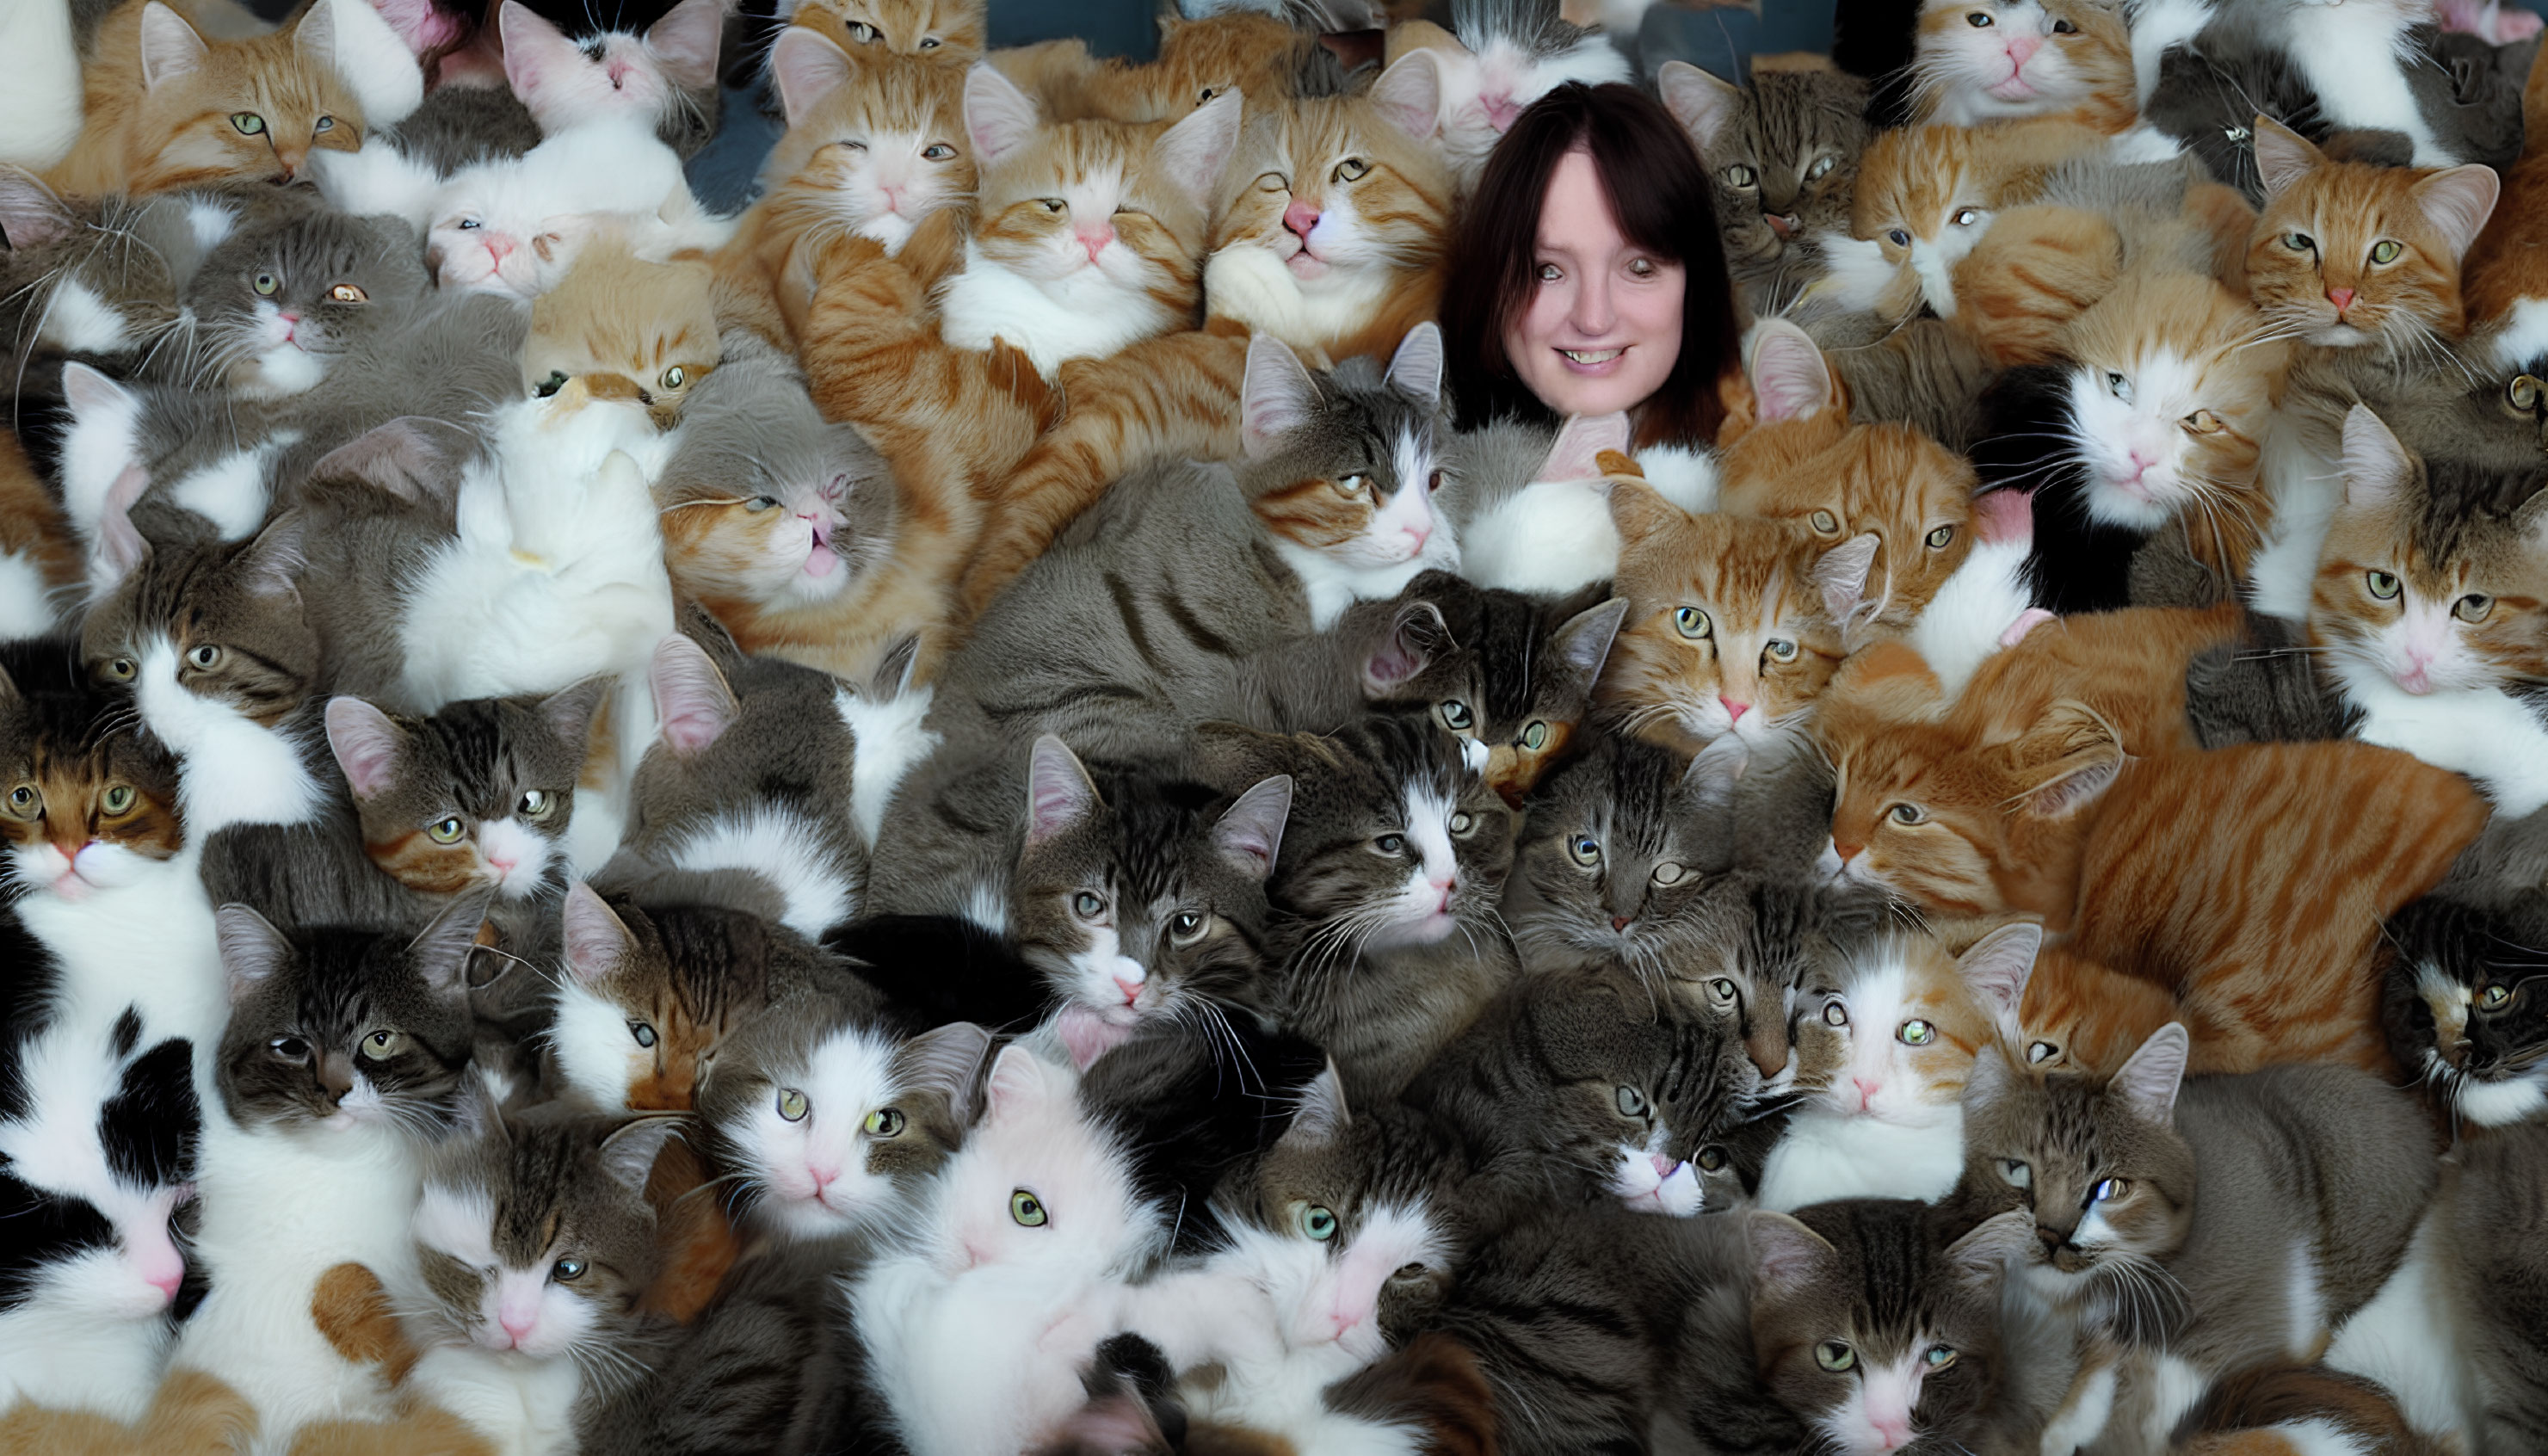 Smiling woman's face surrounded by colorful cats.